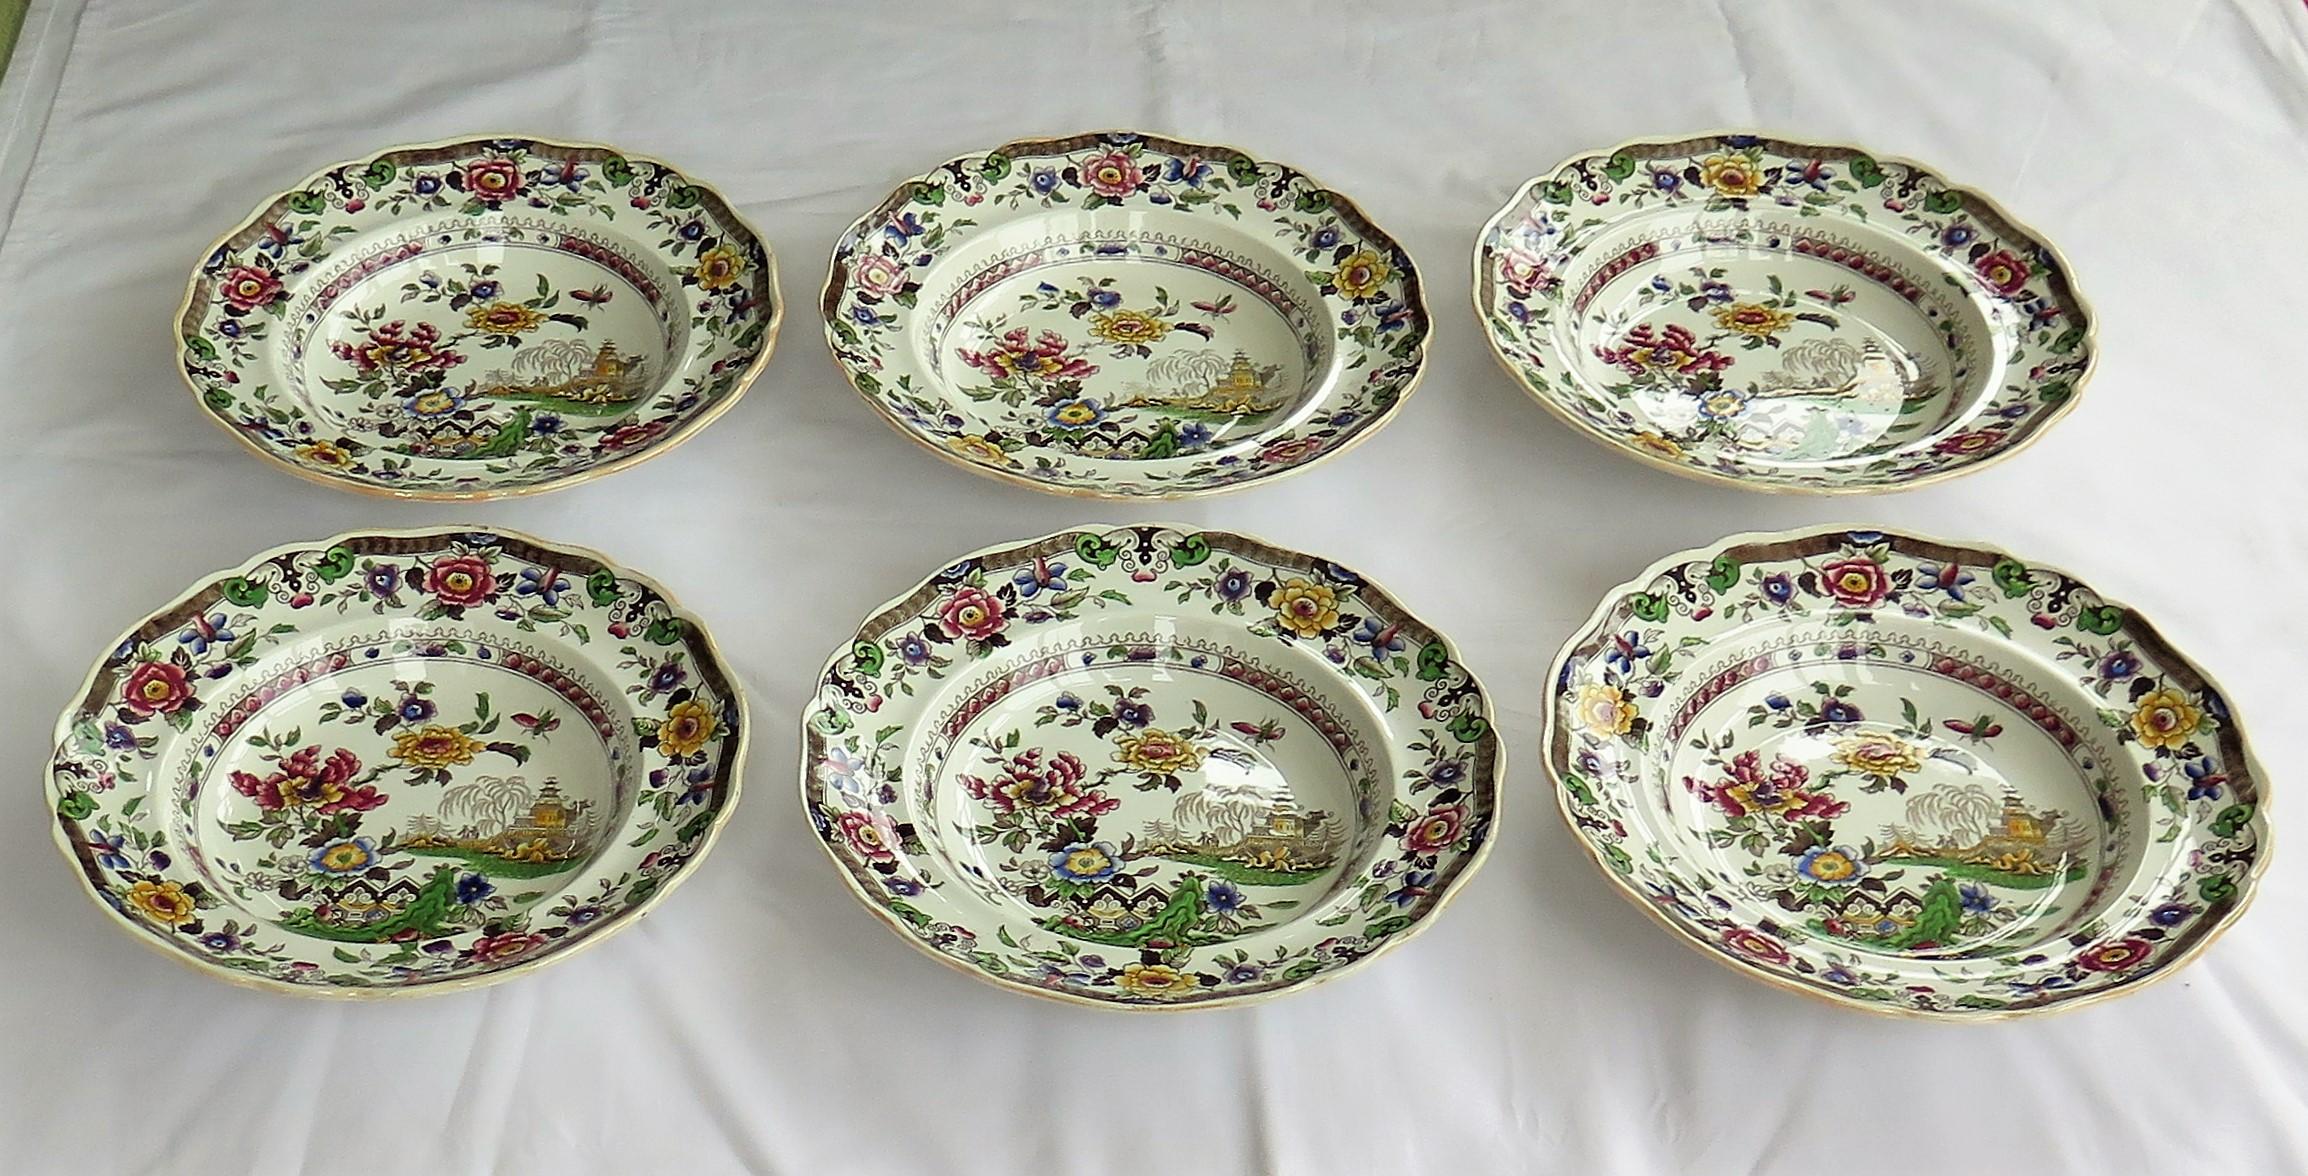 English SIX Pottery Soup Bowls or Plates by Zachariah Boyle Chinese Flora Pattern